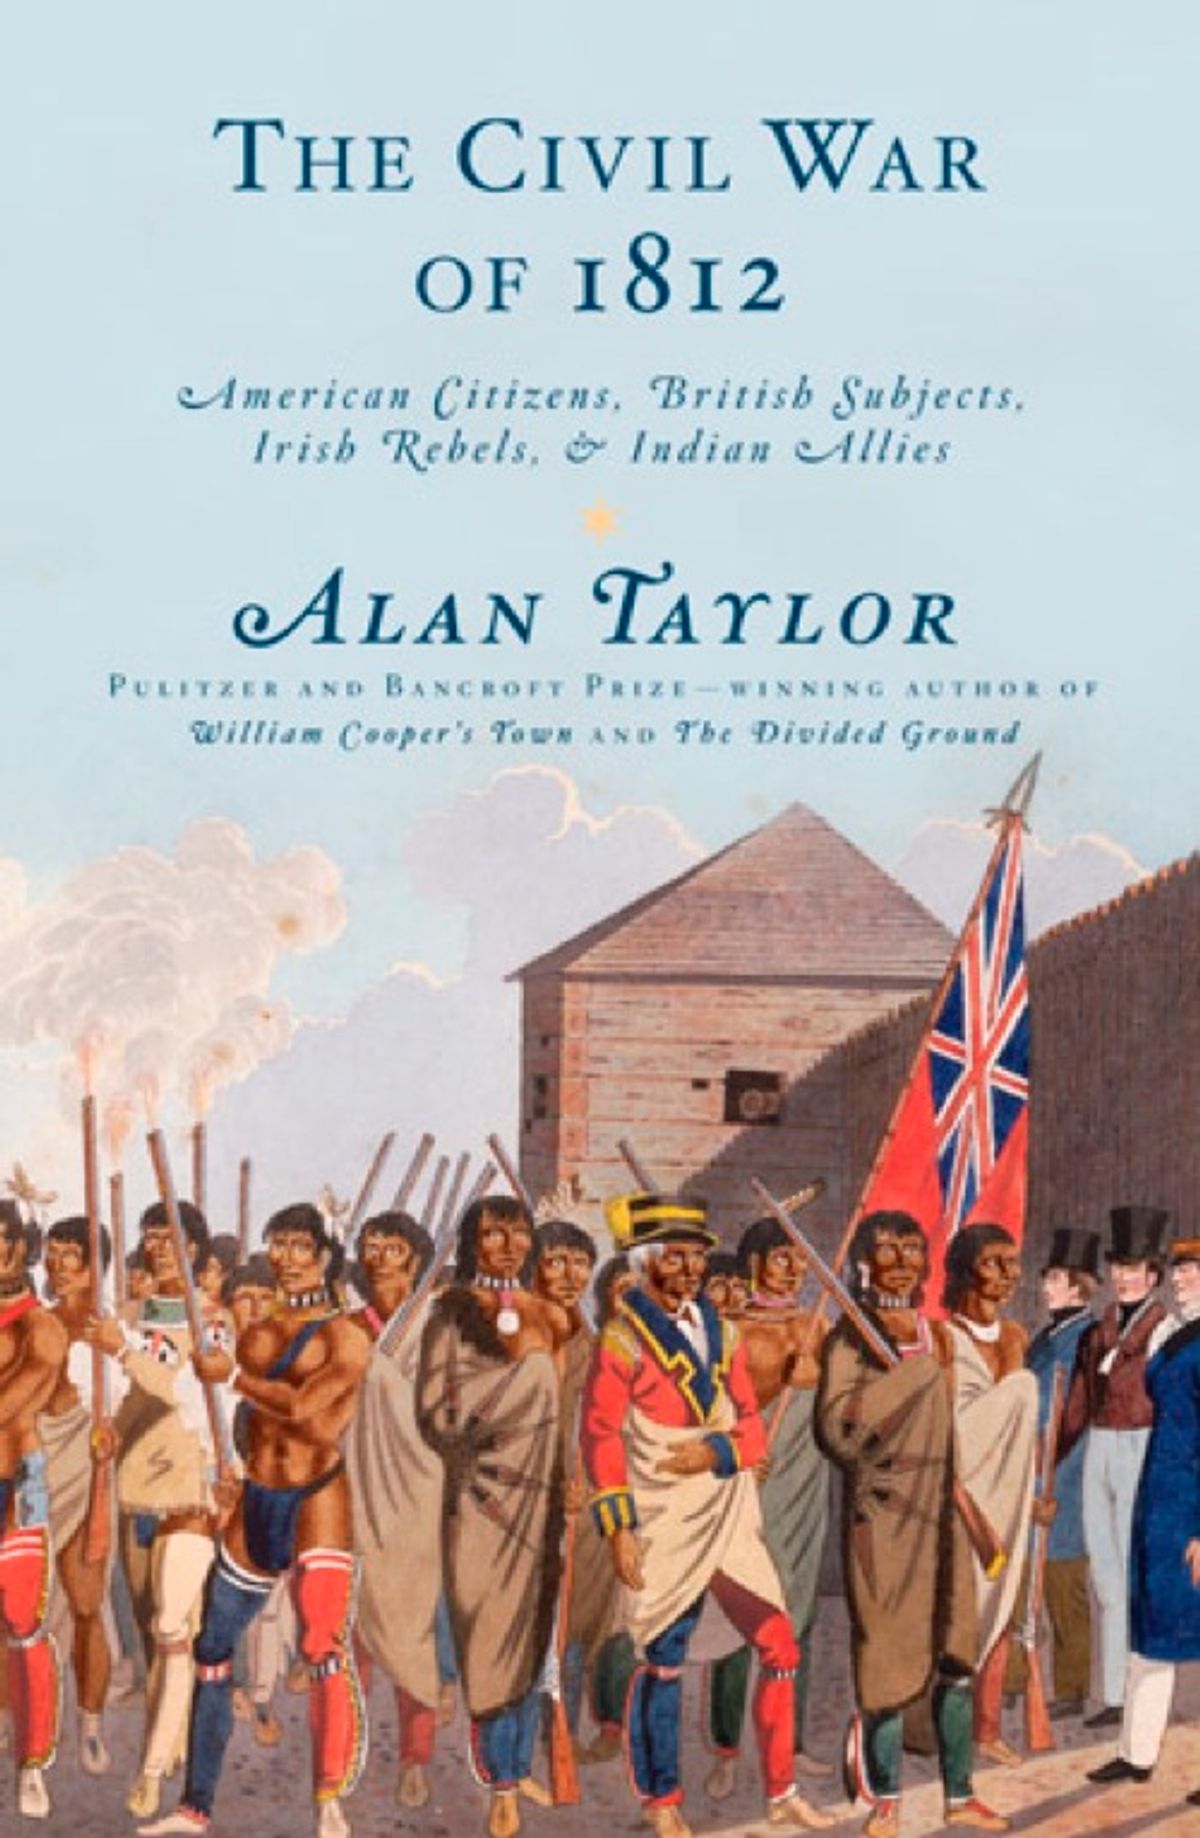 "The Civil War of 1812" by Alan Taylor  